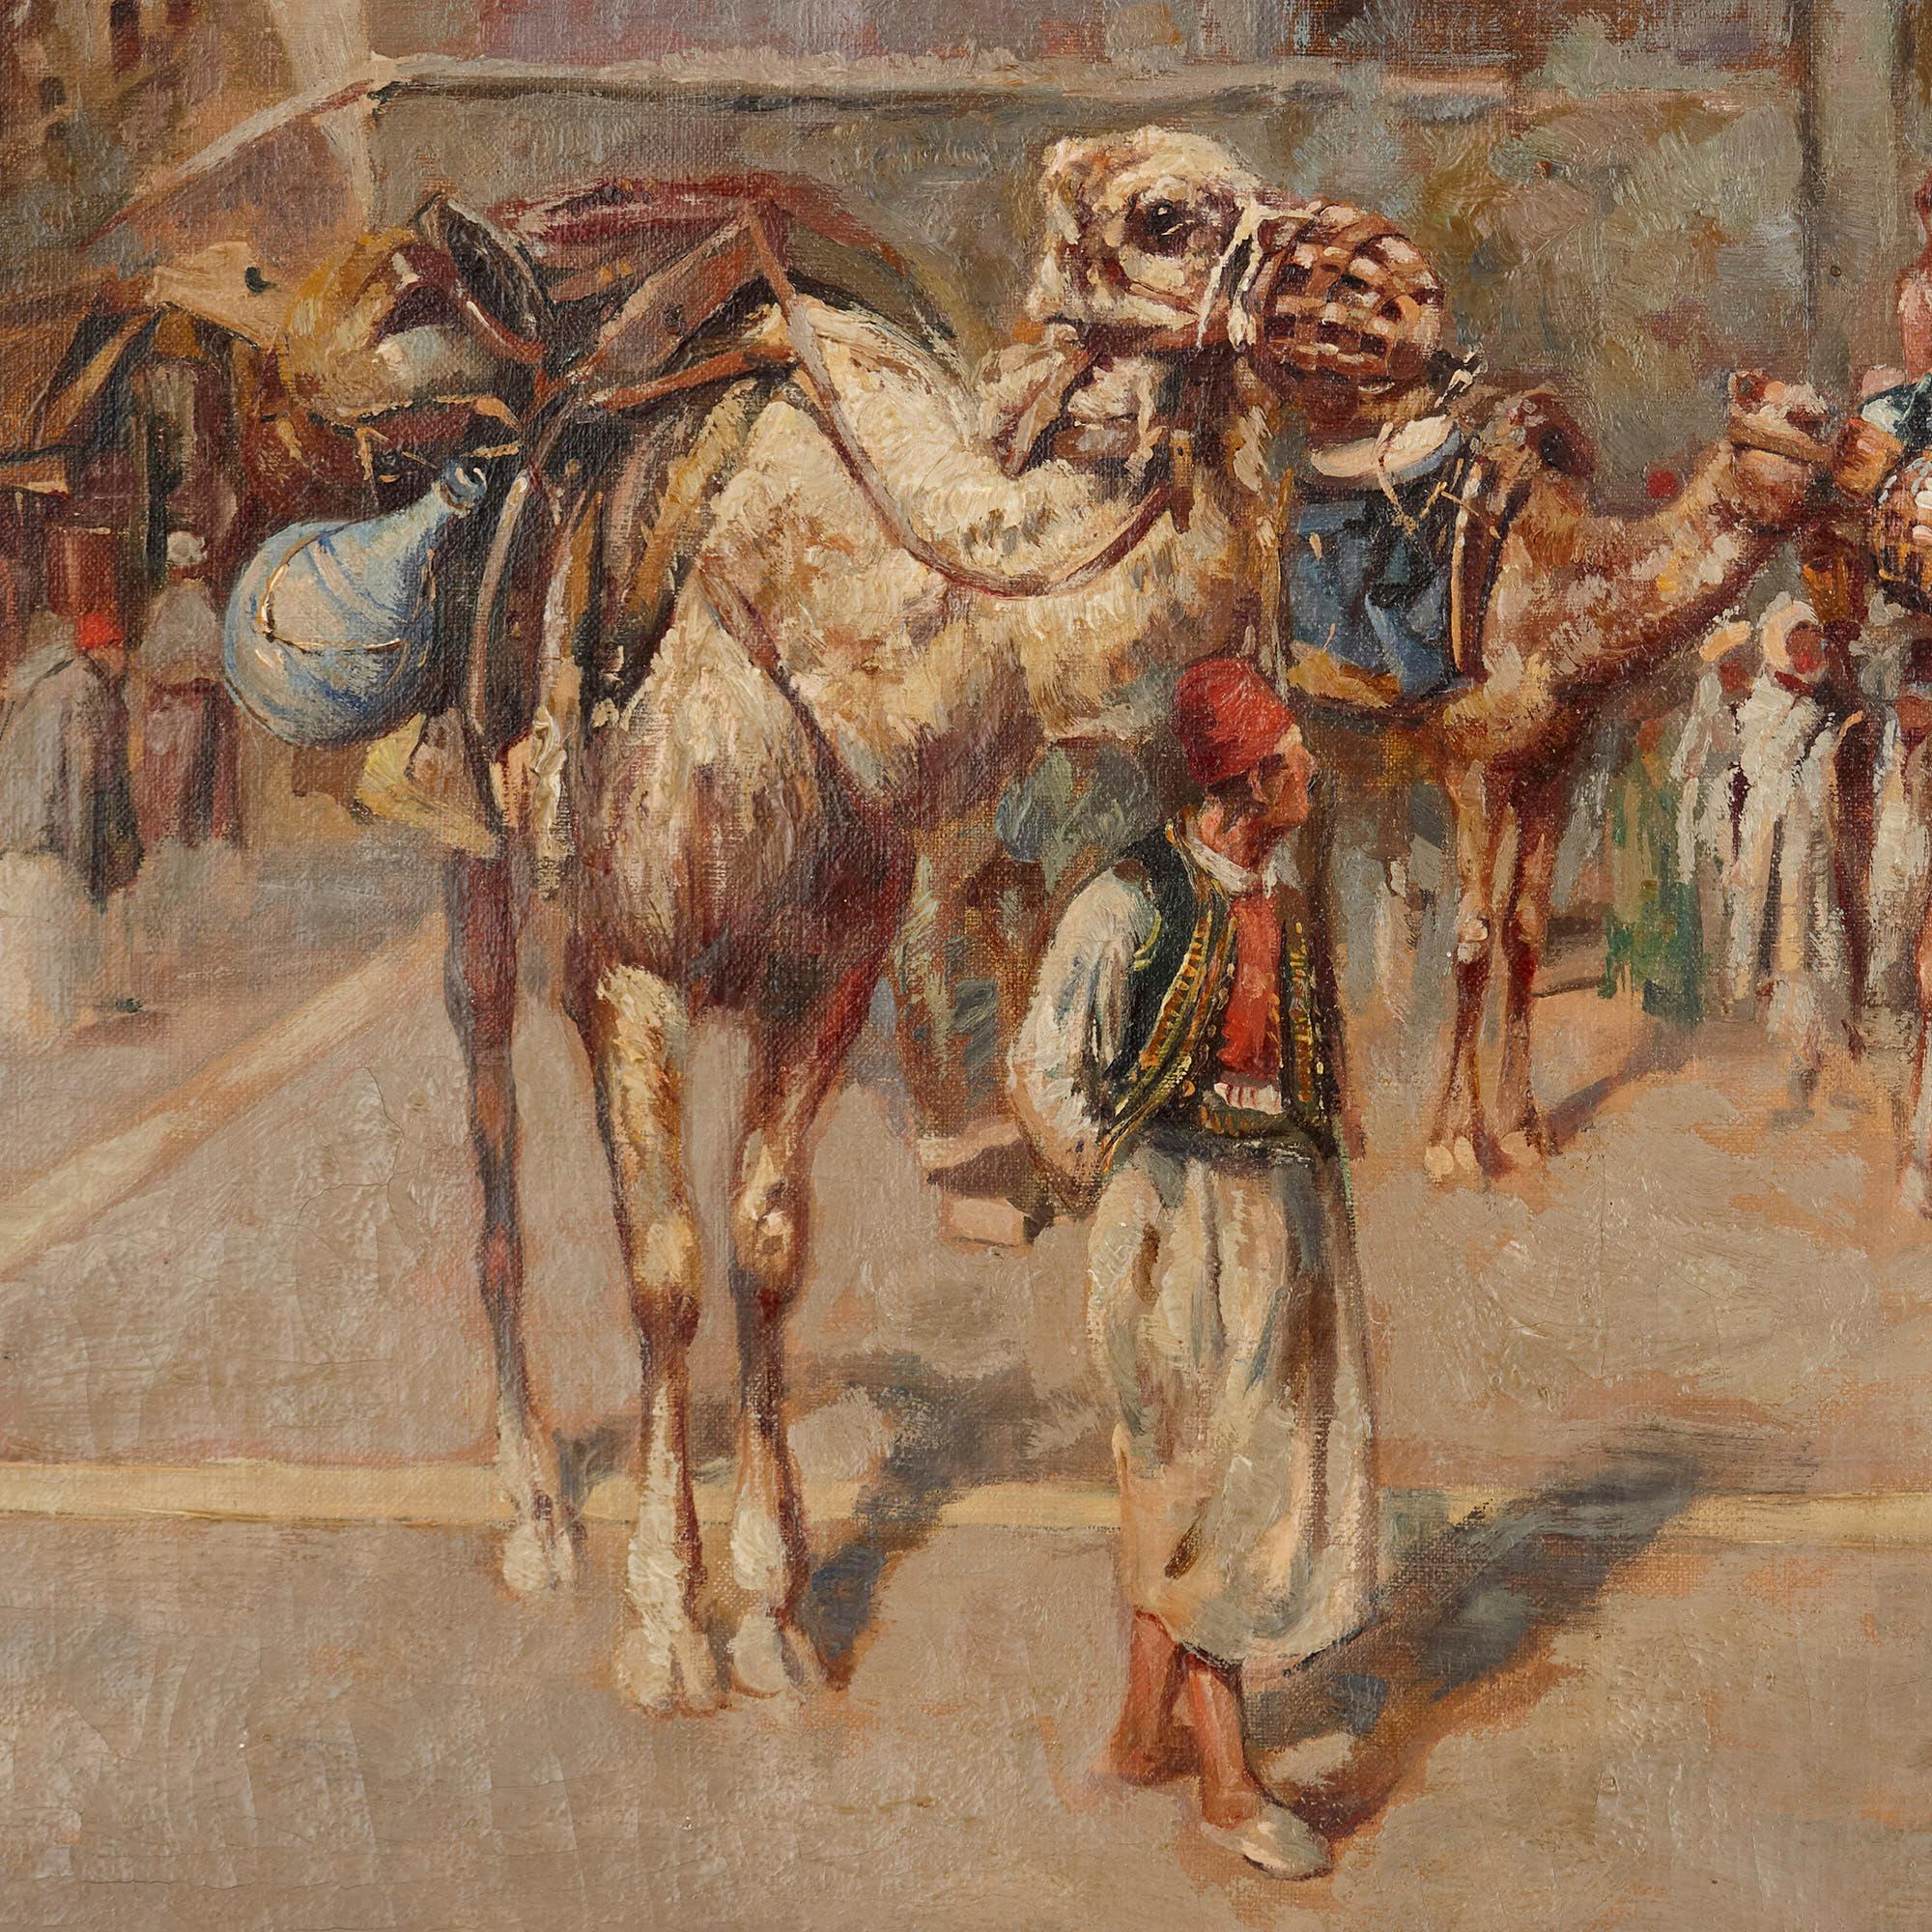 Antique Orientalist painting of Middle Eastern scene  - Brown Figurative Painting by O. F. Perrota